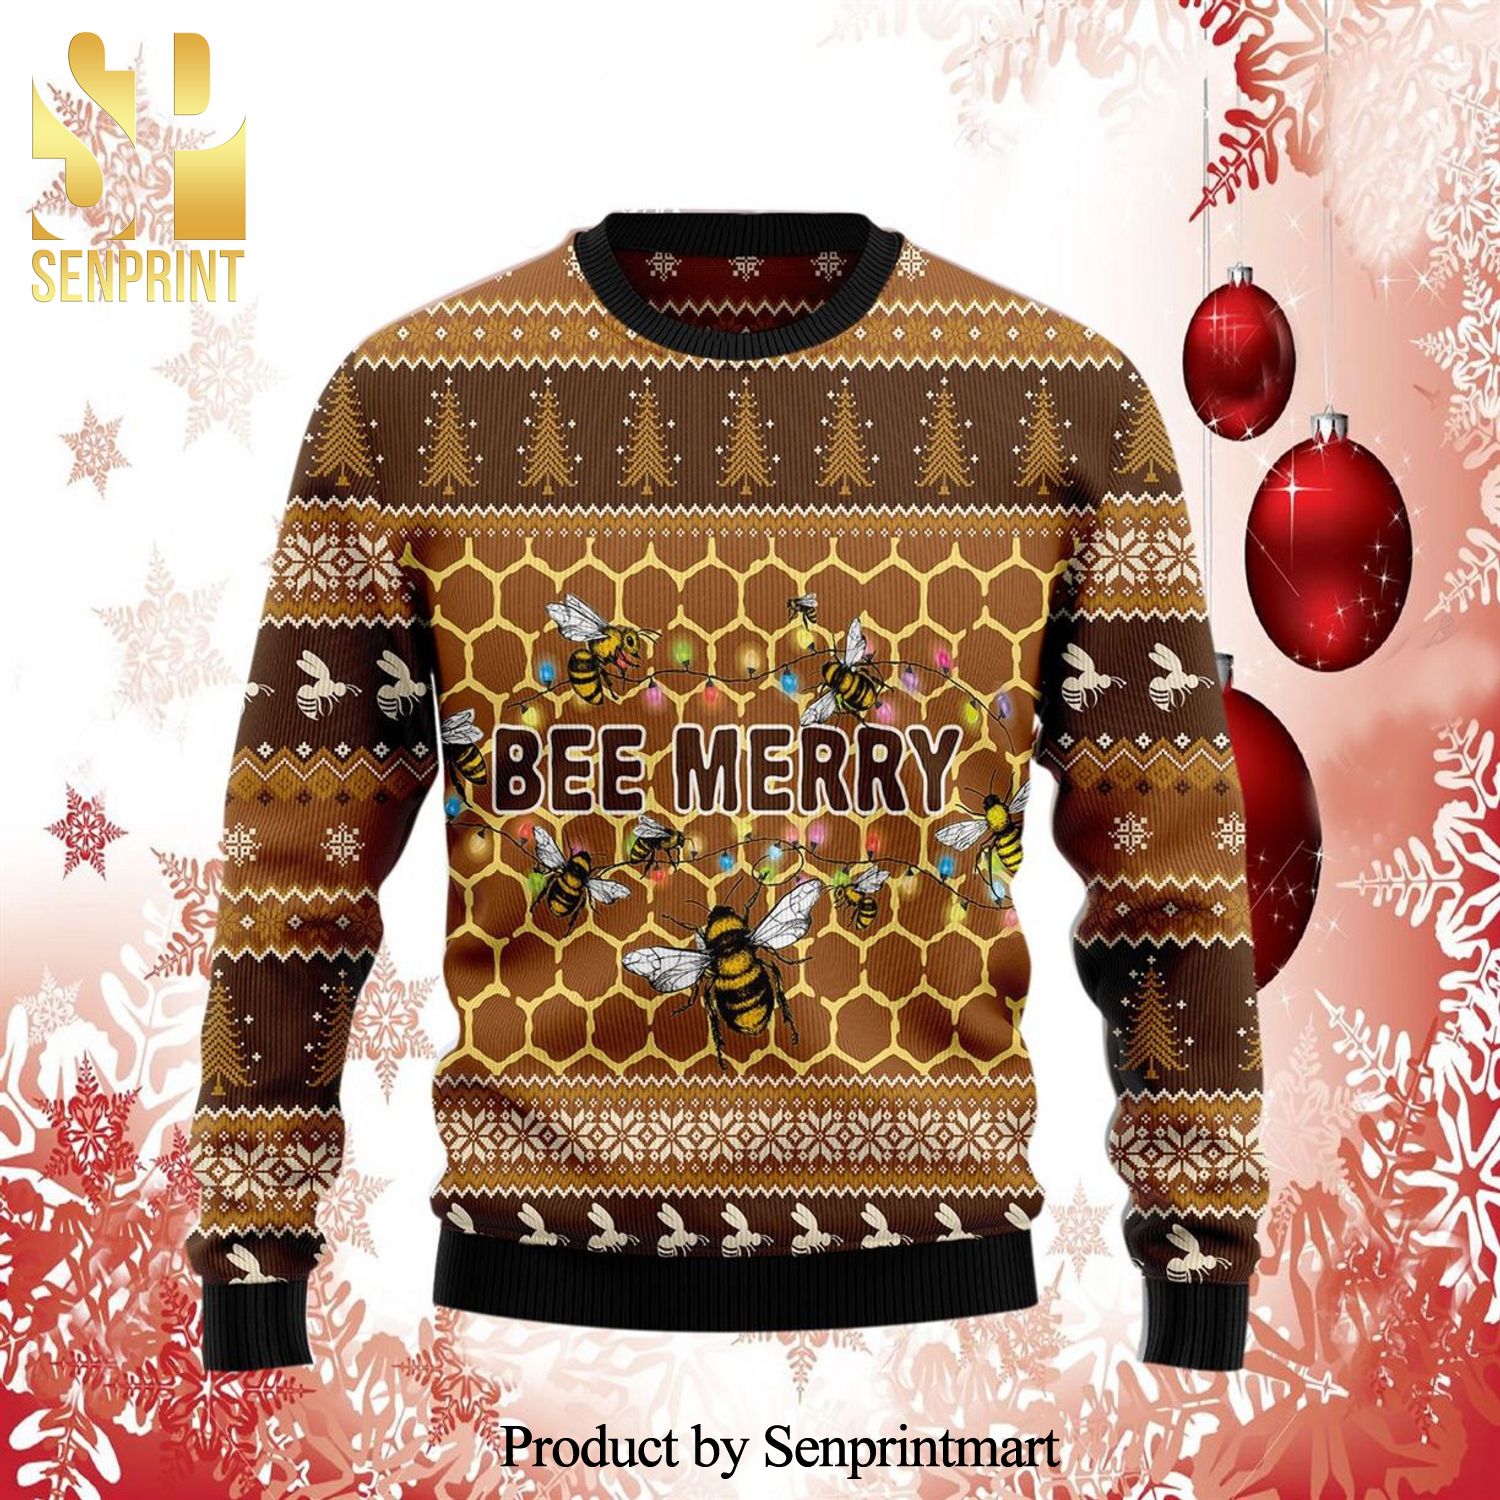 Bee Merry Christmas Knitted Ugly Christmas Sweater